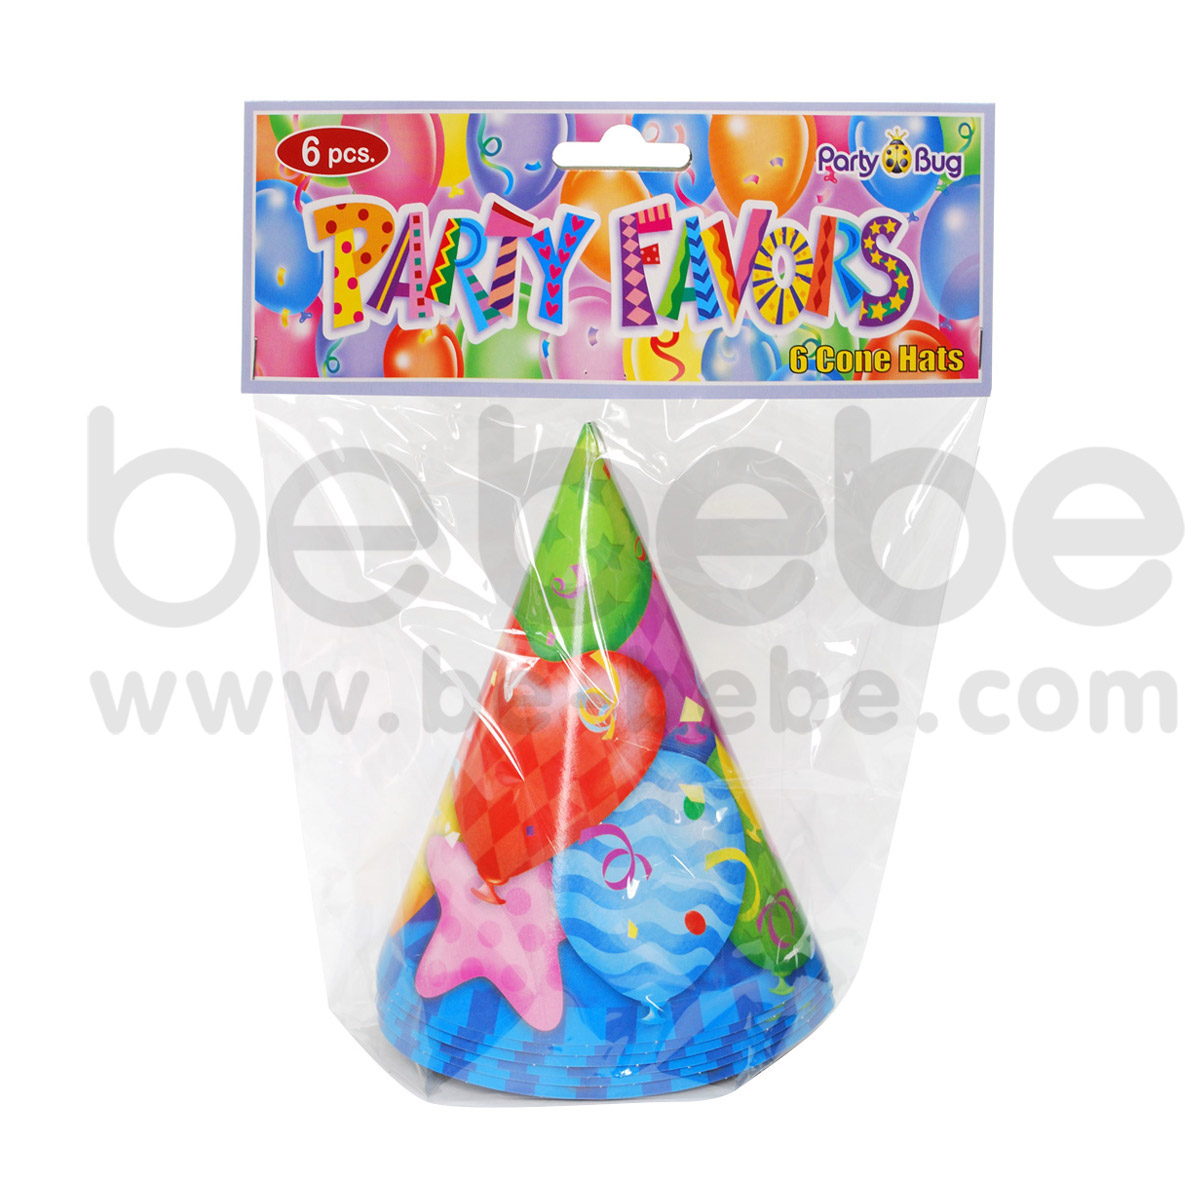 PARTY BUG : Cone hat 6 inch., 1 Pack